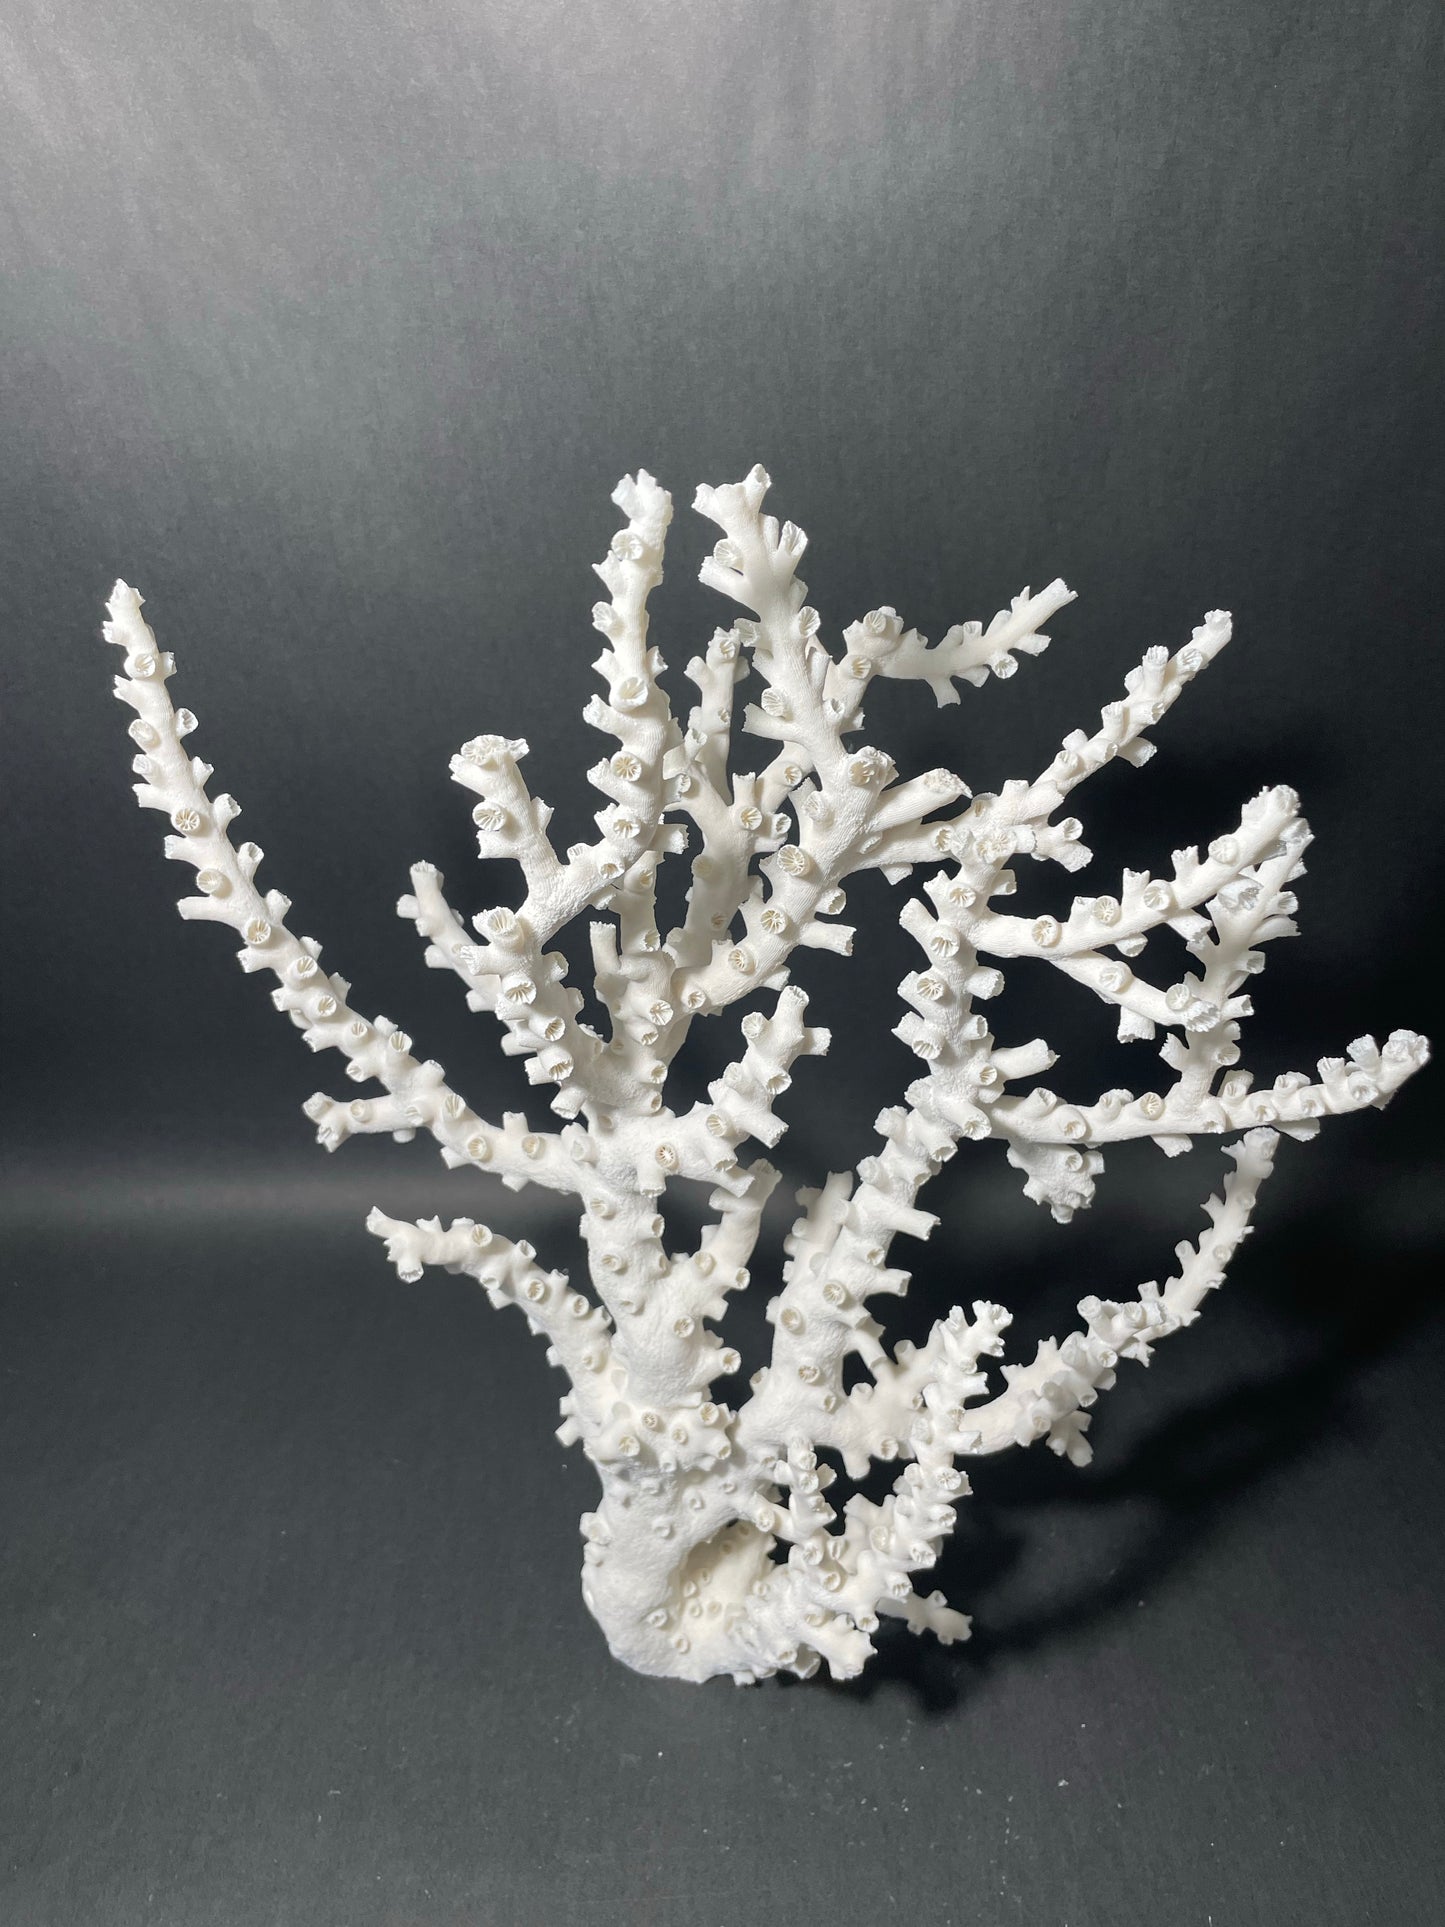 Octopus Coral (17”x13”x7”)